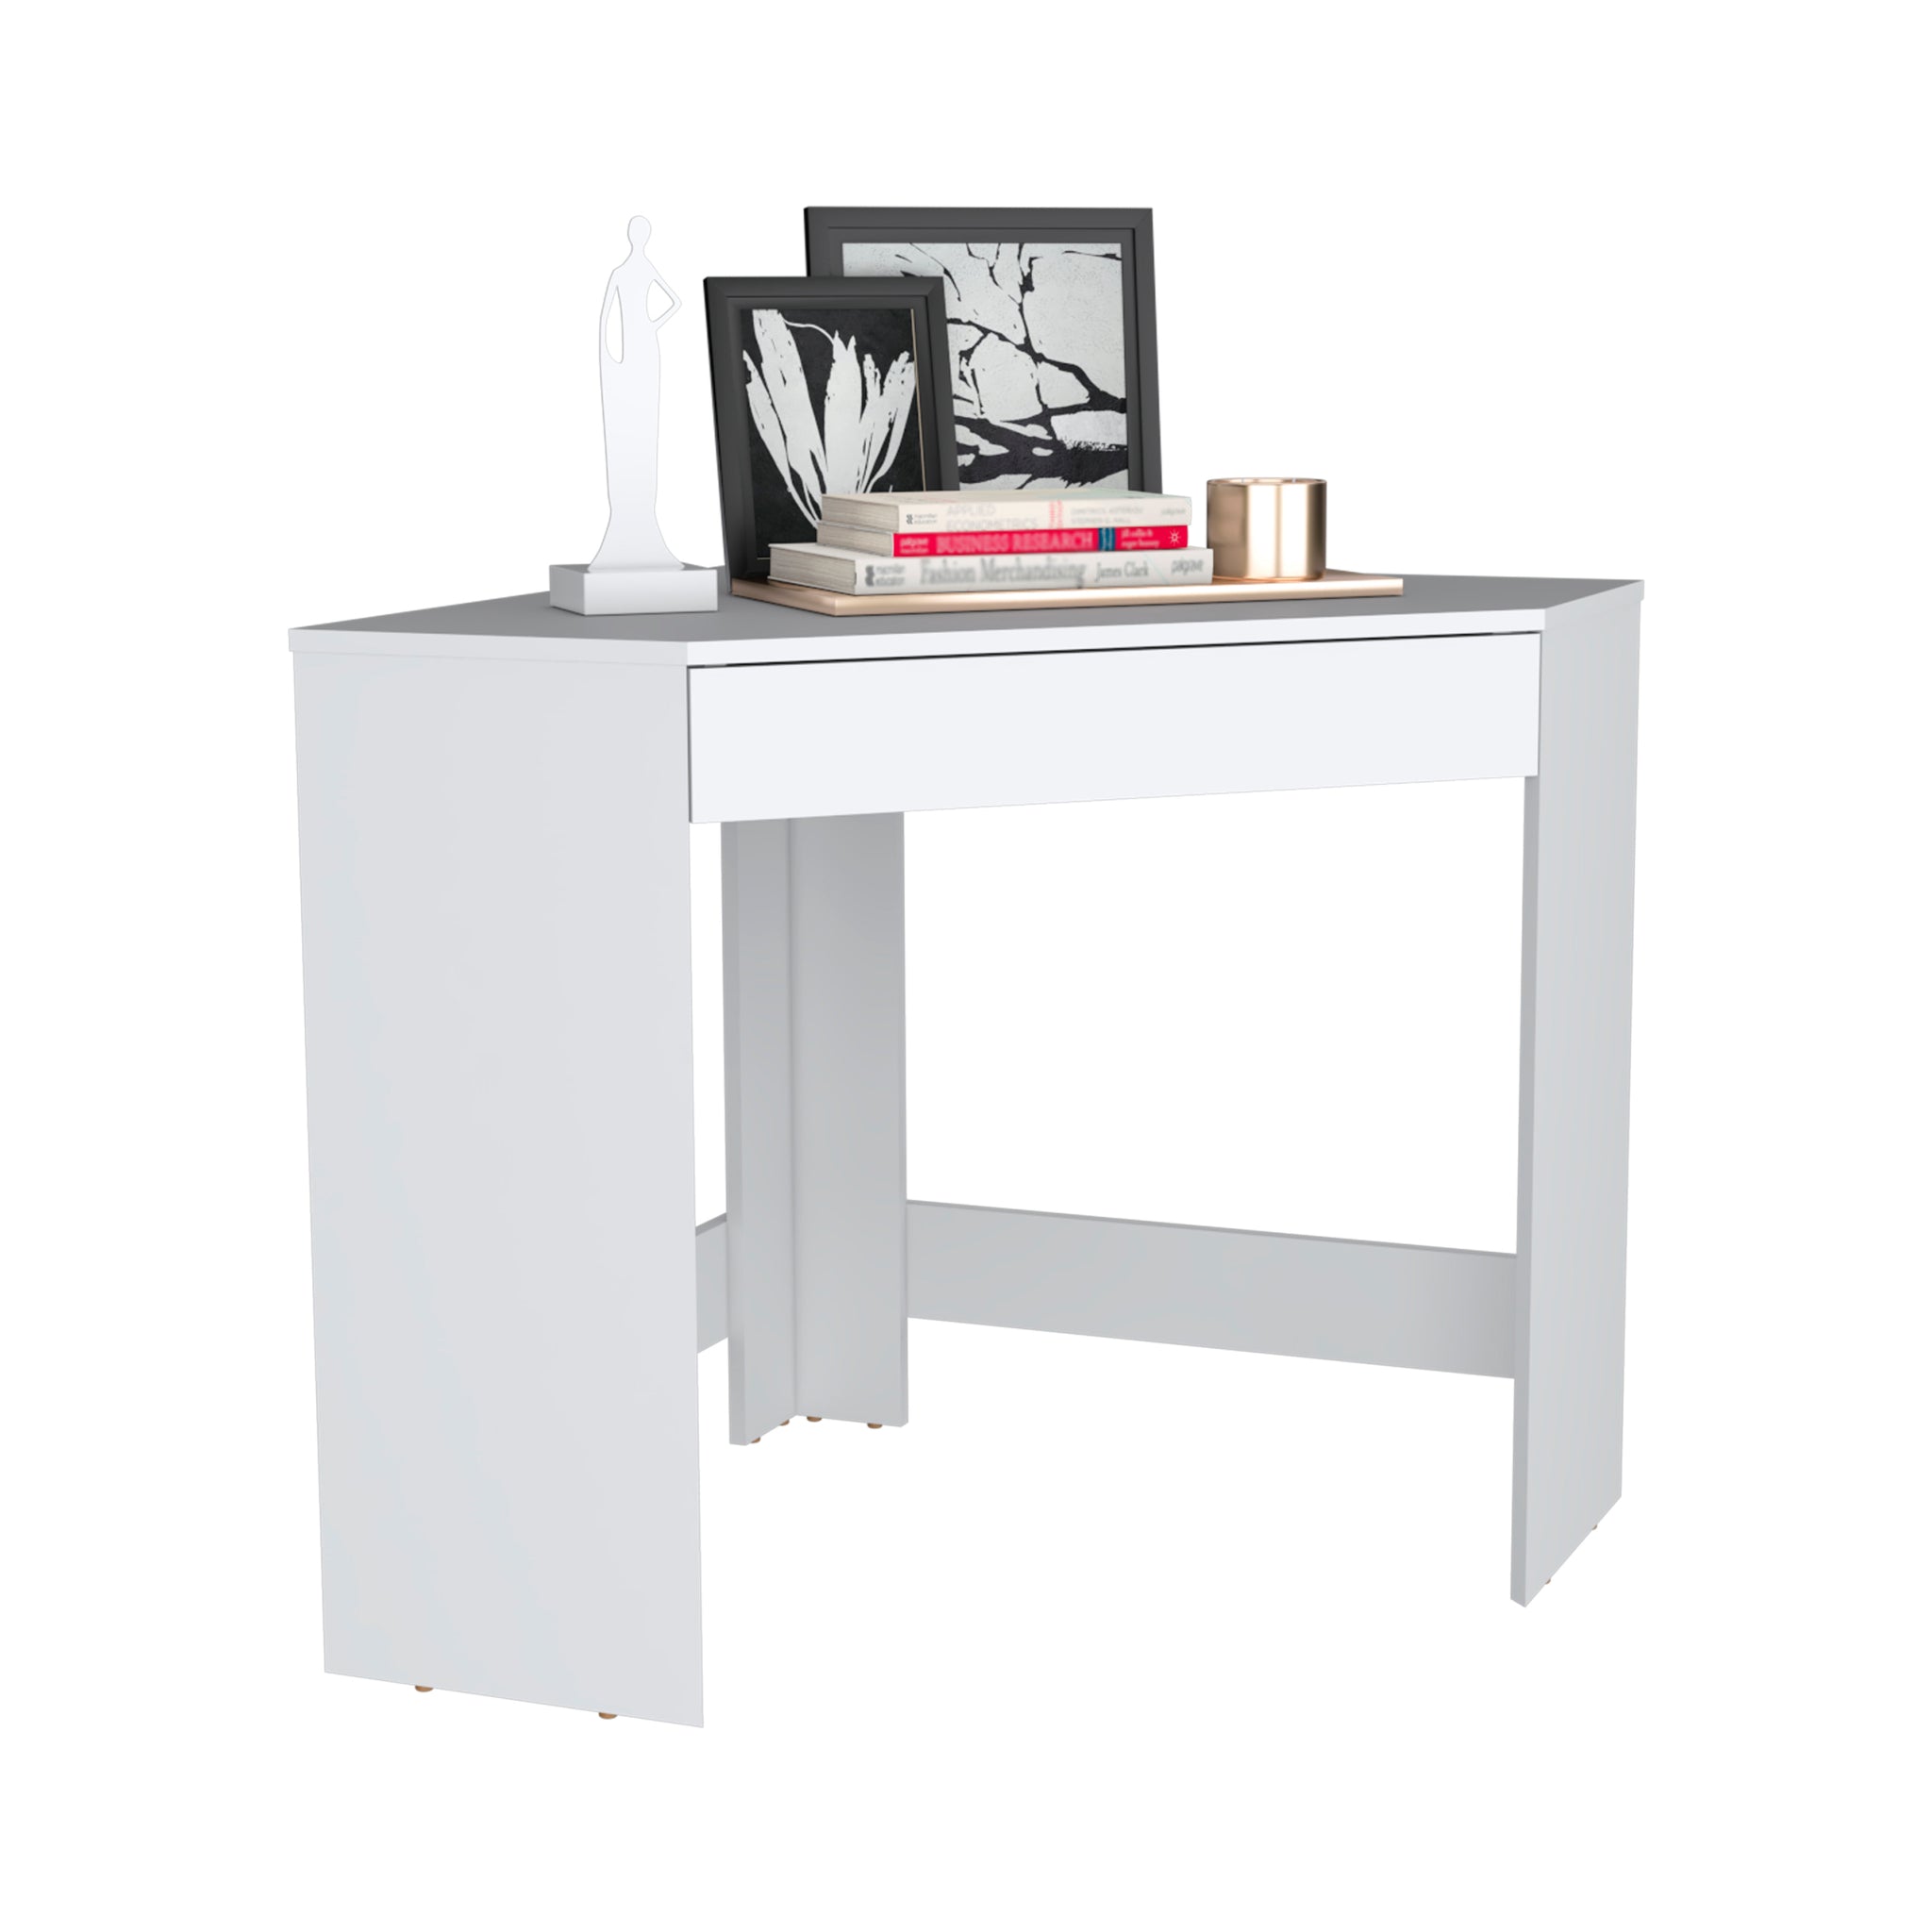 white Corner Desk with Compact Design and Drawer